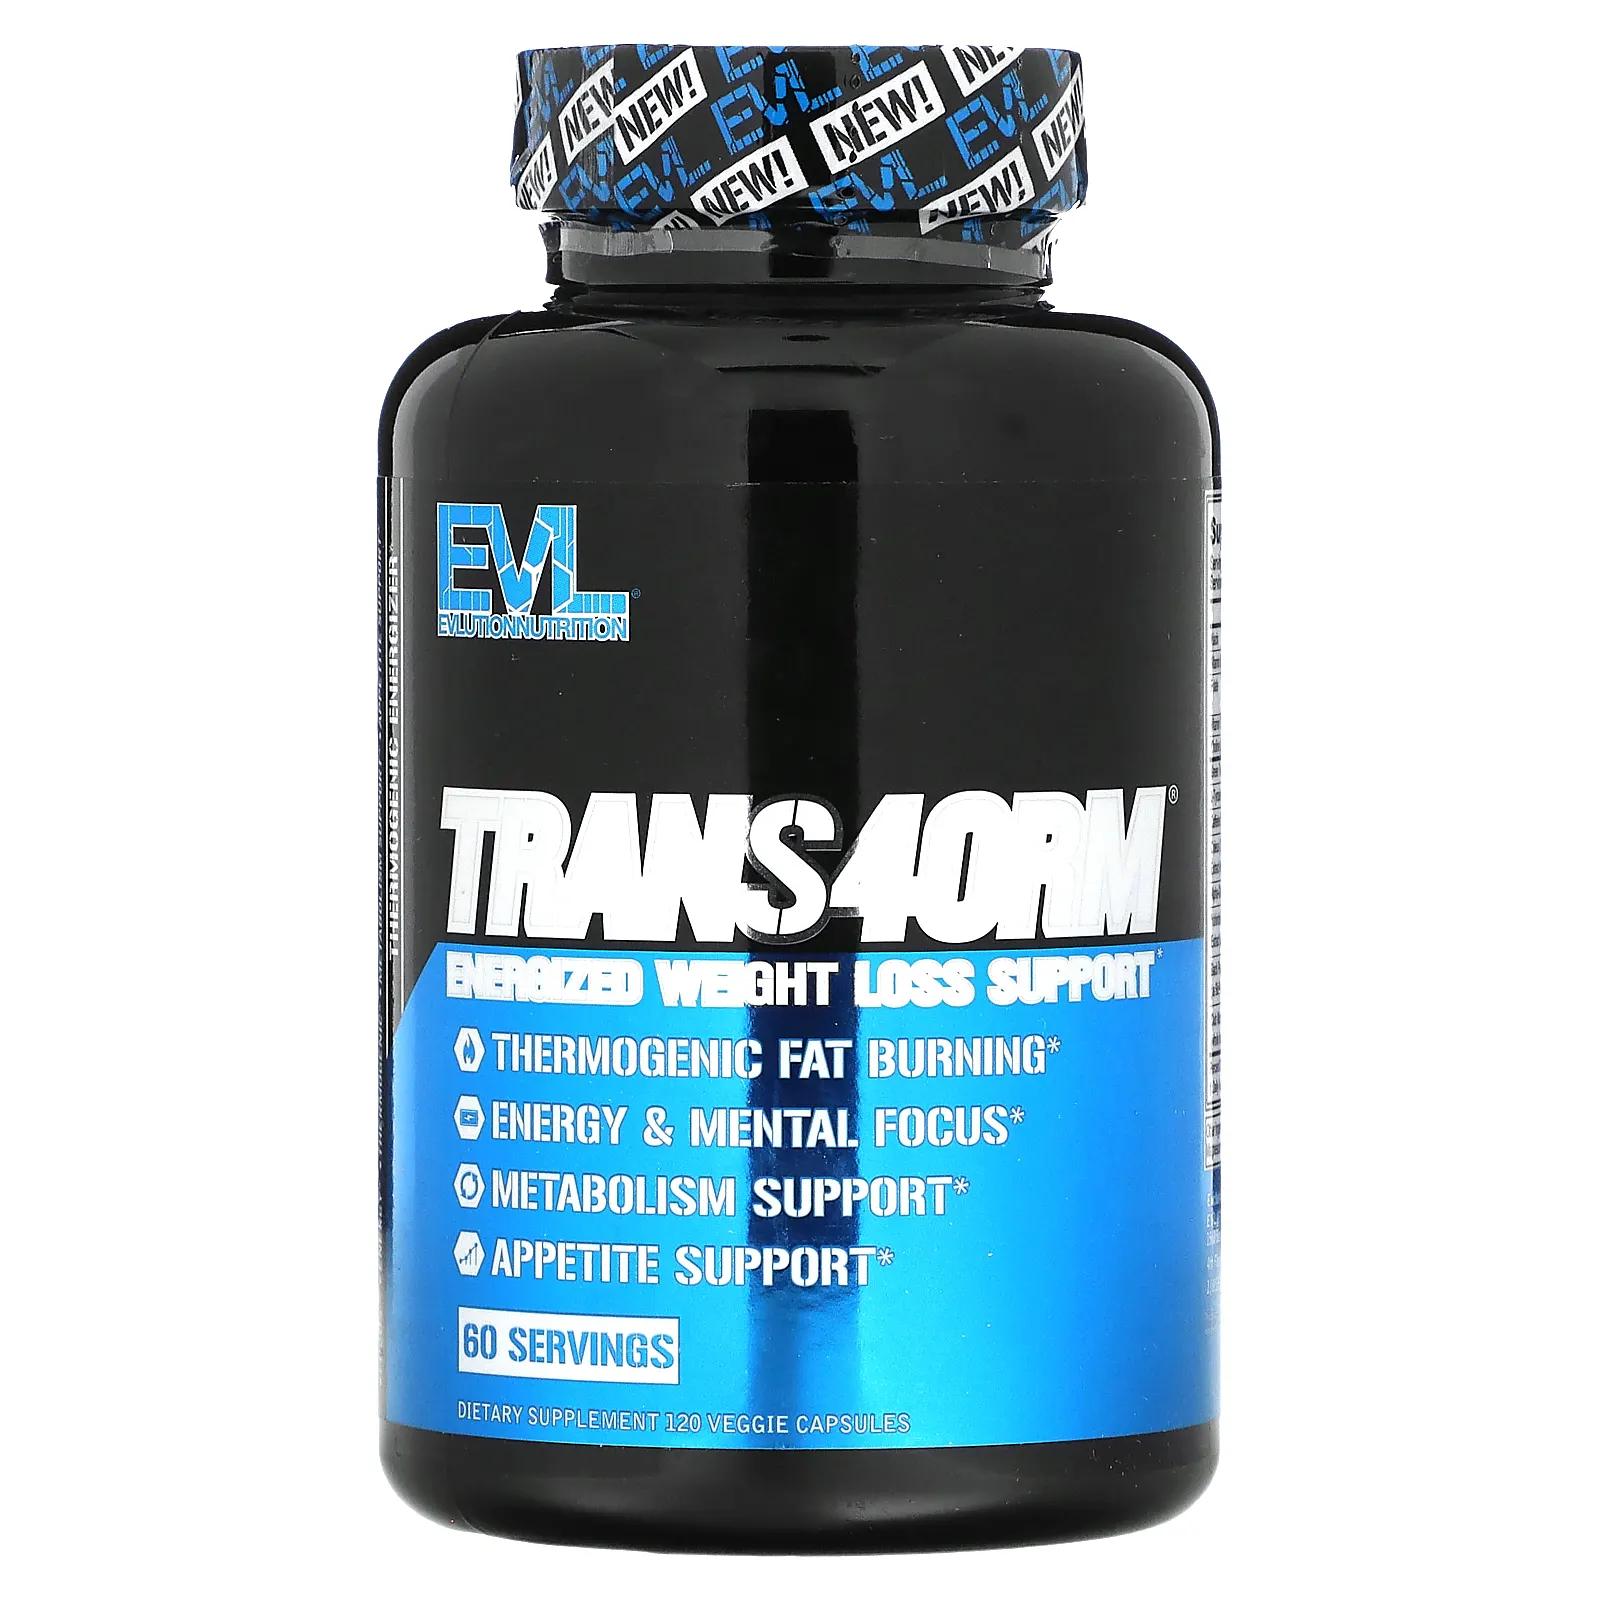 EVLution Nutrition Trans4orm Thermogenic Energizing Fat Burner Supplement 120 Capsules evlution nutrition trans4orm thermogenic energizing fat burner supplement 120 capsules